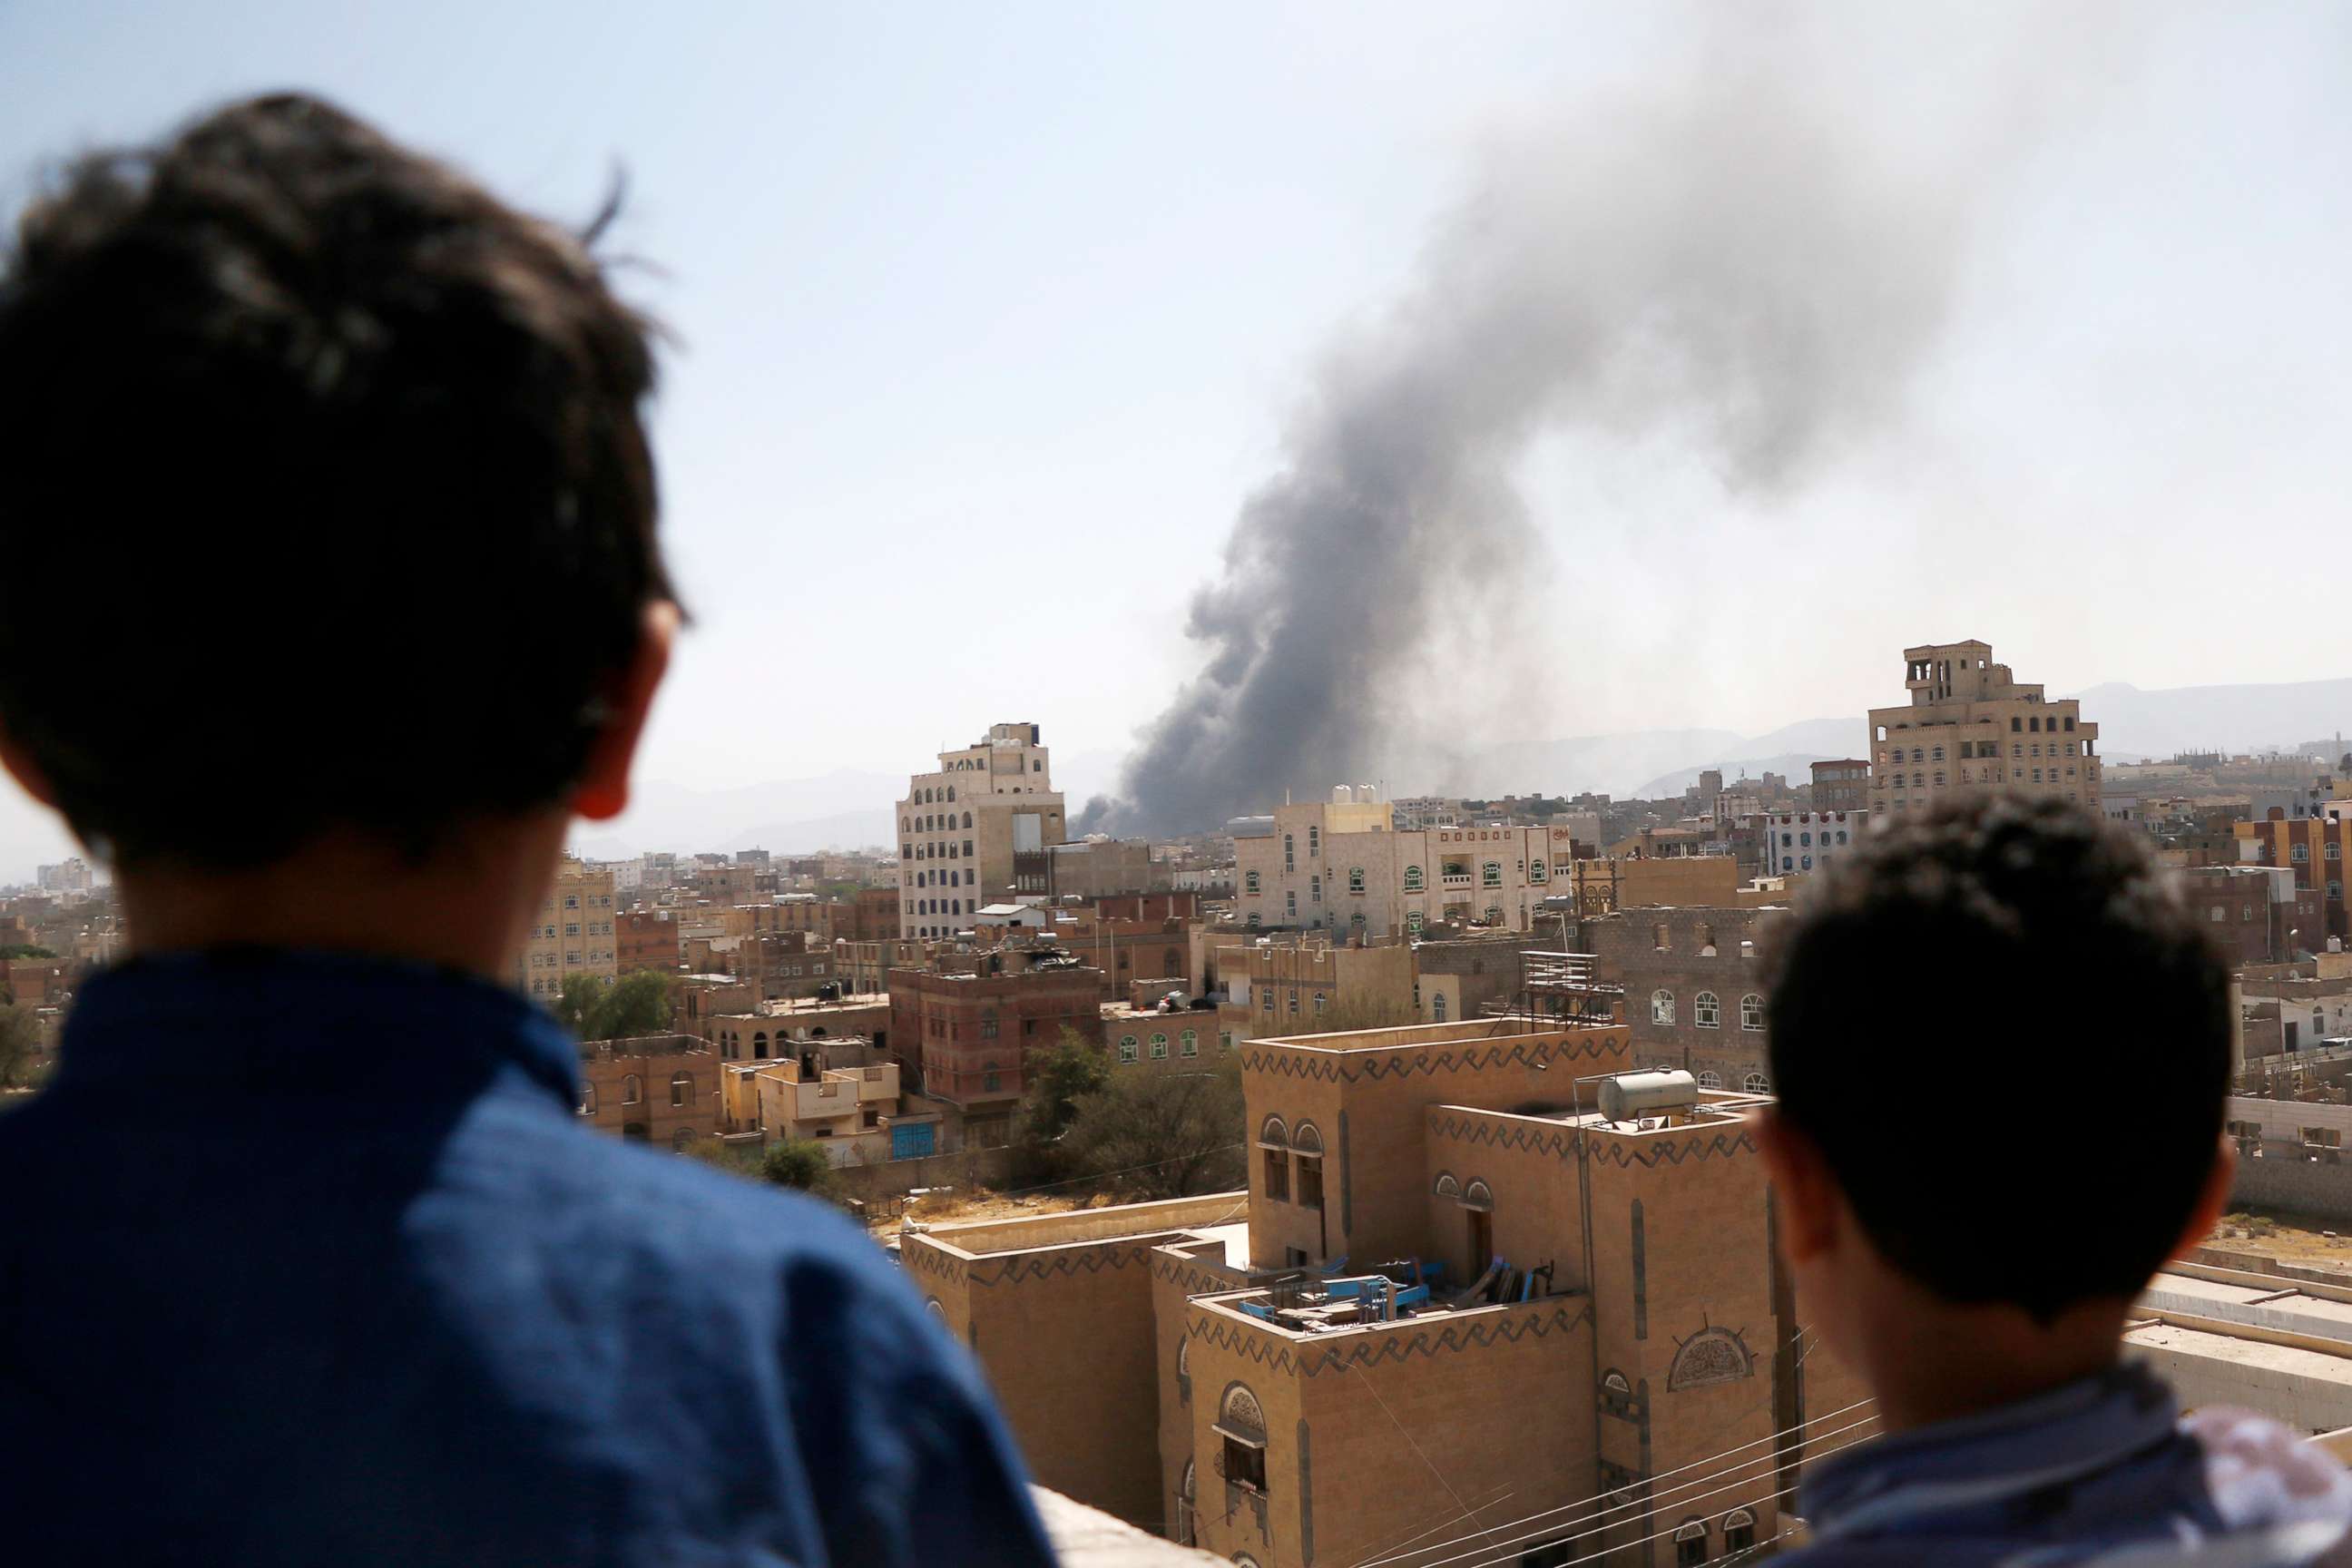 PHOTO: Children look on as smoke billows above the residential area following airstrikes of the Saudi-led coalition targeting Houthi-held military positions on March 07, 2021 in Sana'a, Yemen